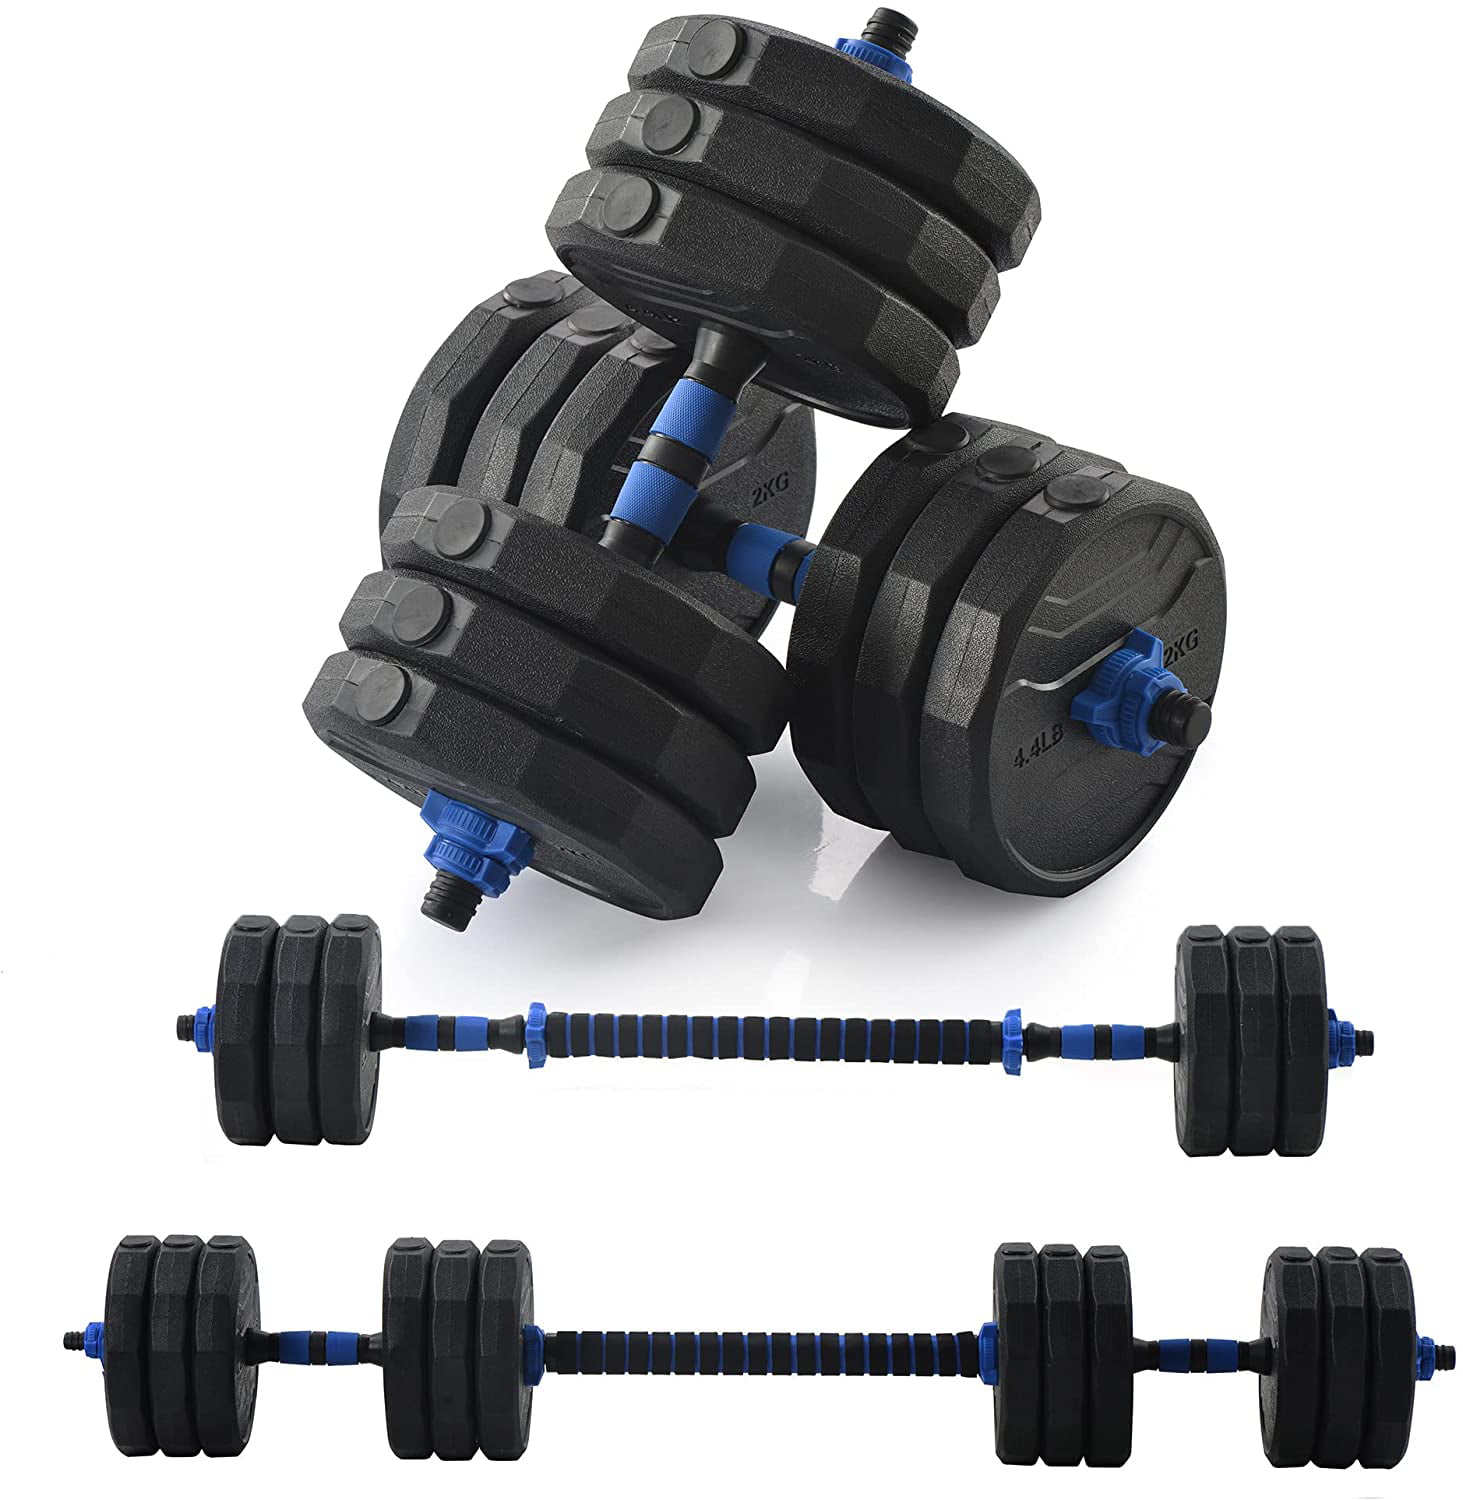 Exercise Dumbbells with Anti-Slip Handle All-Purpose for Home Gym Office Workout Fitness 4.4lbs x 2 Adjustable Dumbbells Set for Women Men 8.8lbs